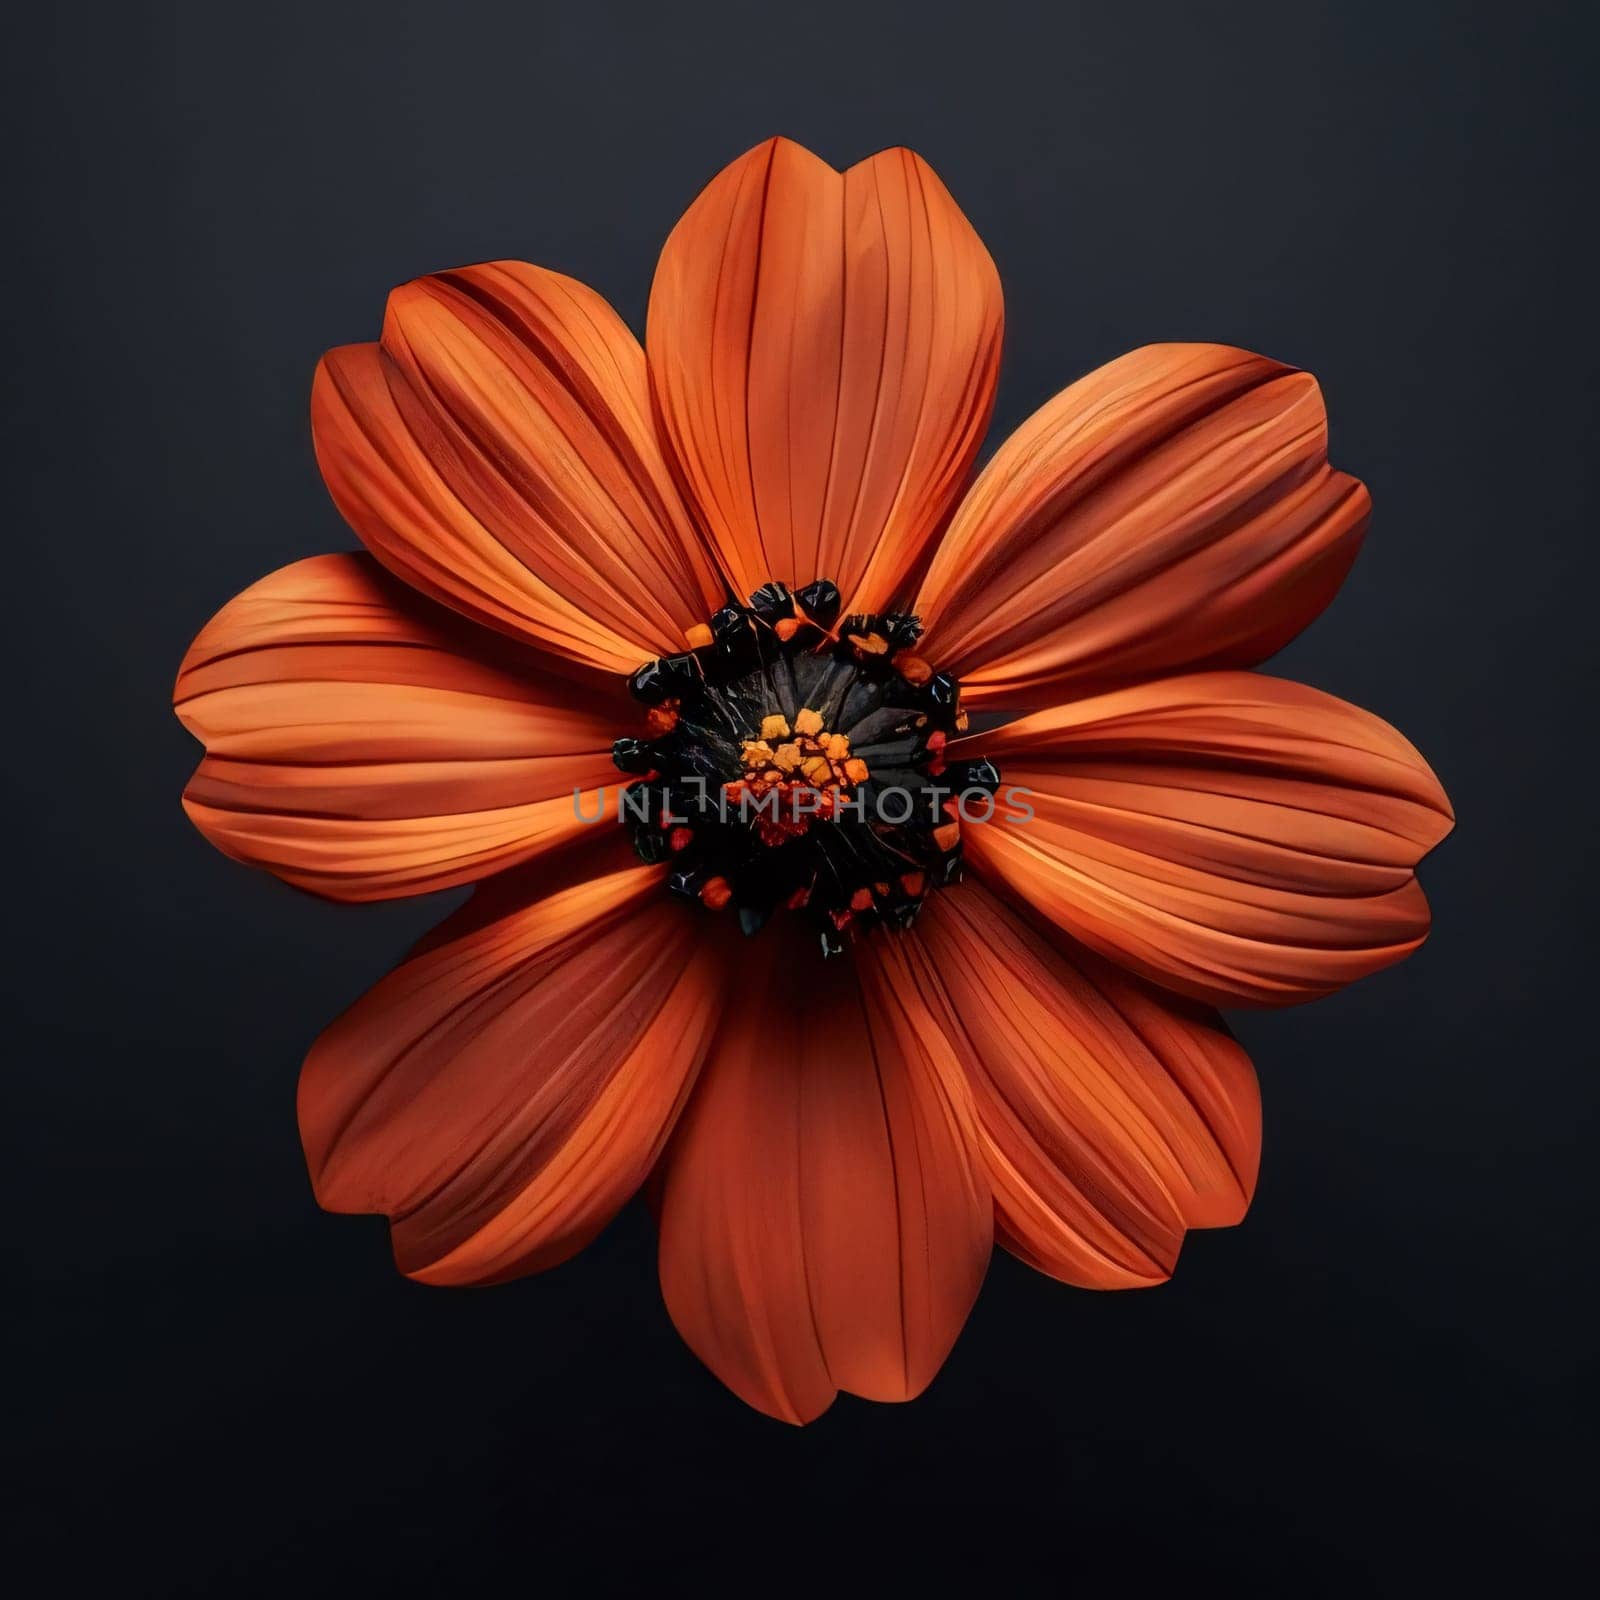 Orange flower with water drops isolated on black background. Flowering flowers, a symbol of spring, new life. by ThemesS